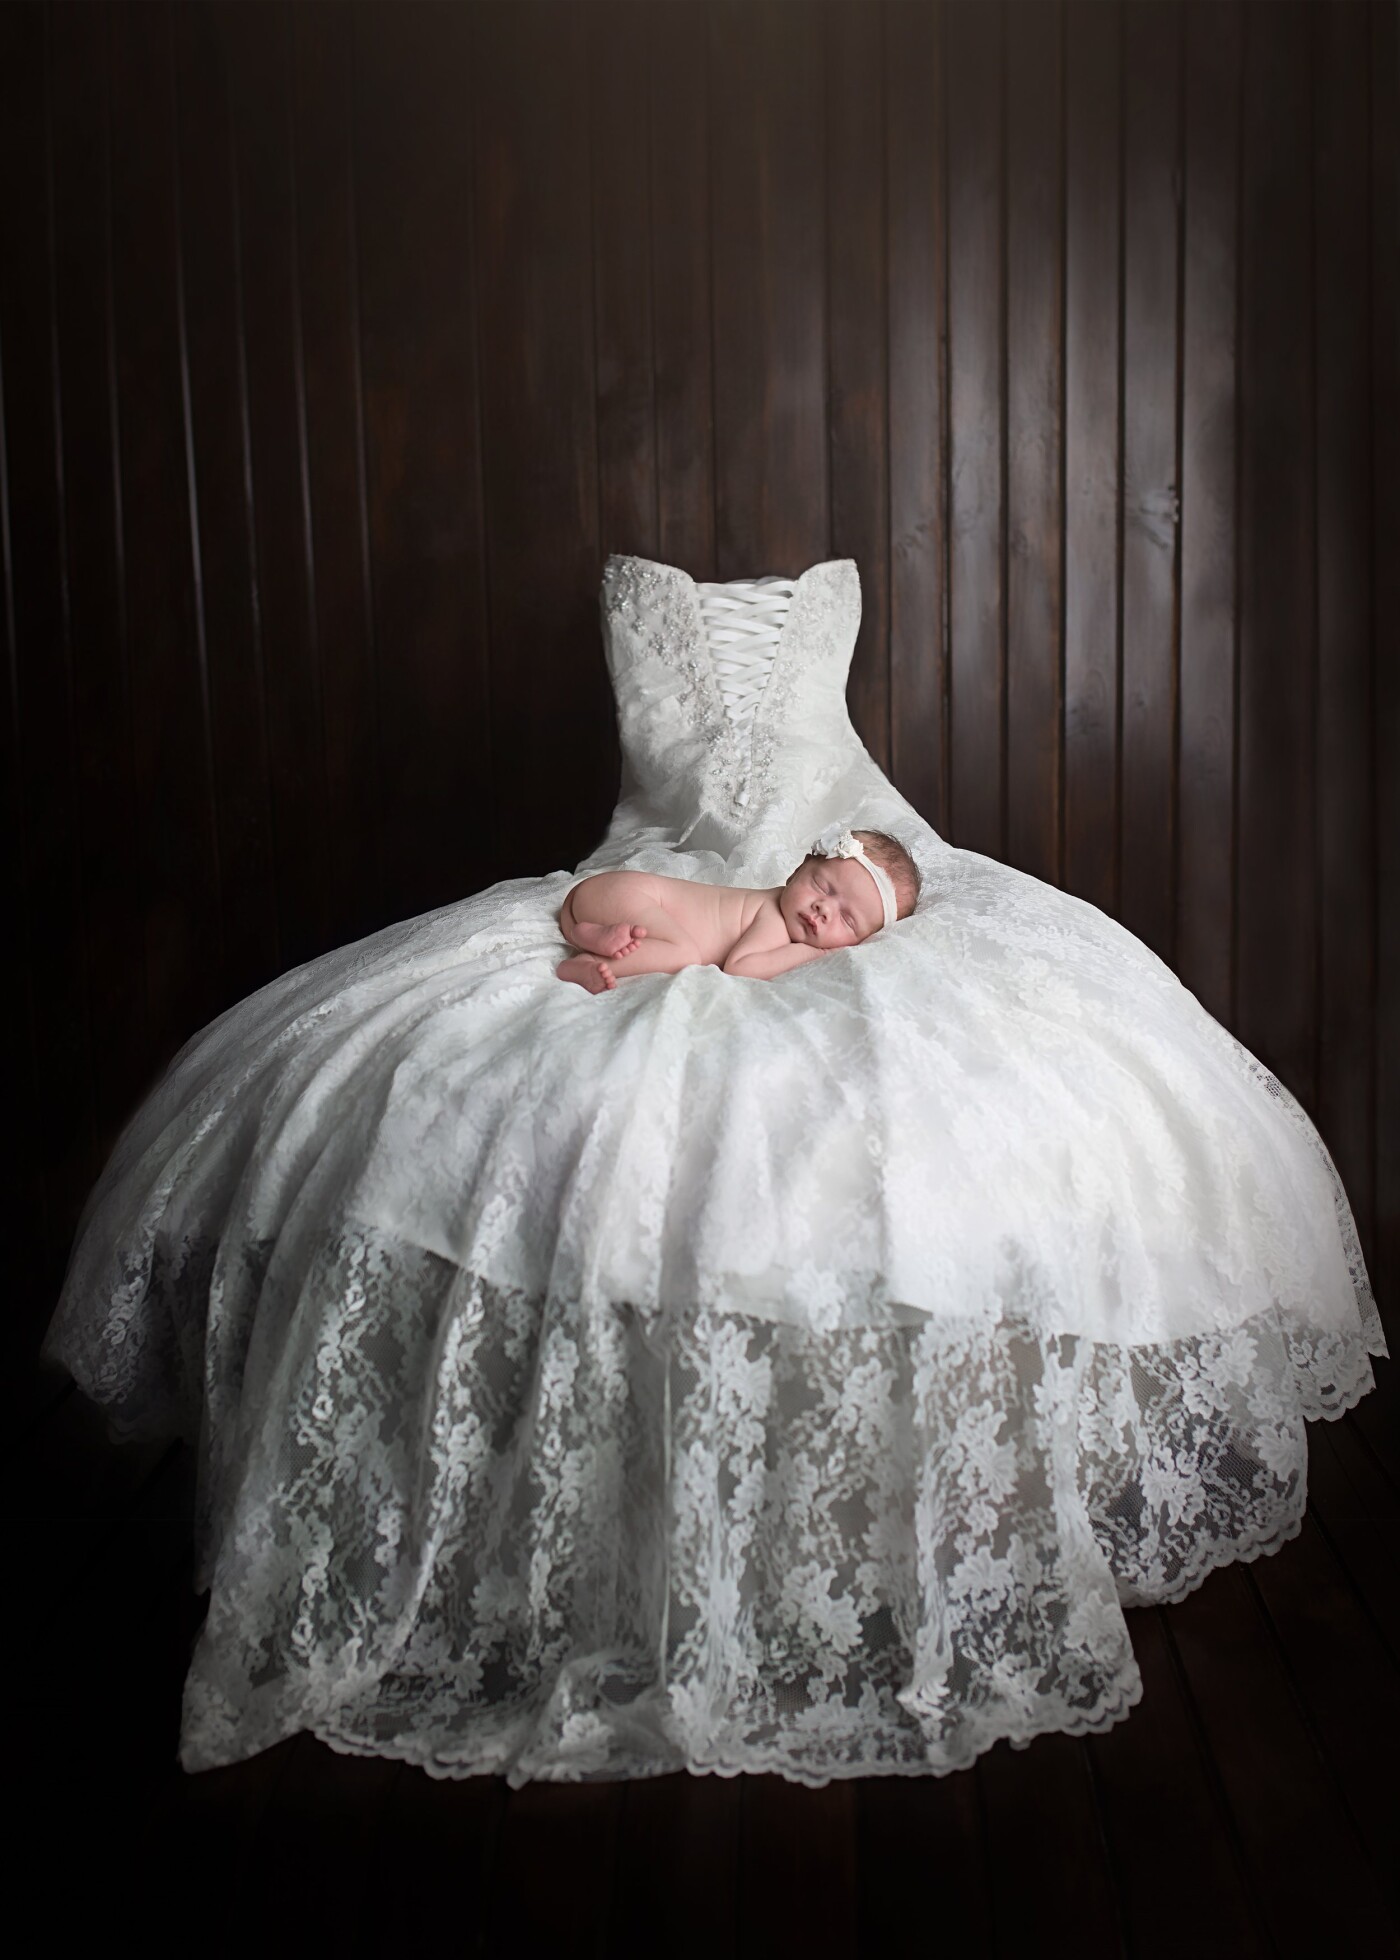 This little sweetheart's mother wanted to incorporate her wedding gown into an image for her newborn session.  As she may never actually wear the gown in the future, this image is a precious memory for her parents.